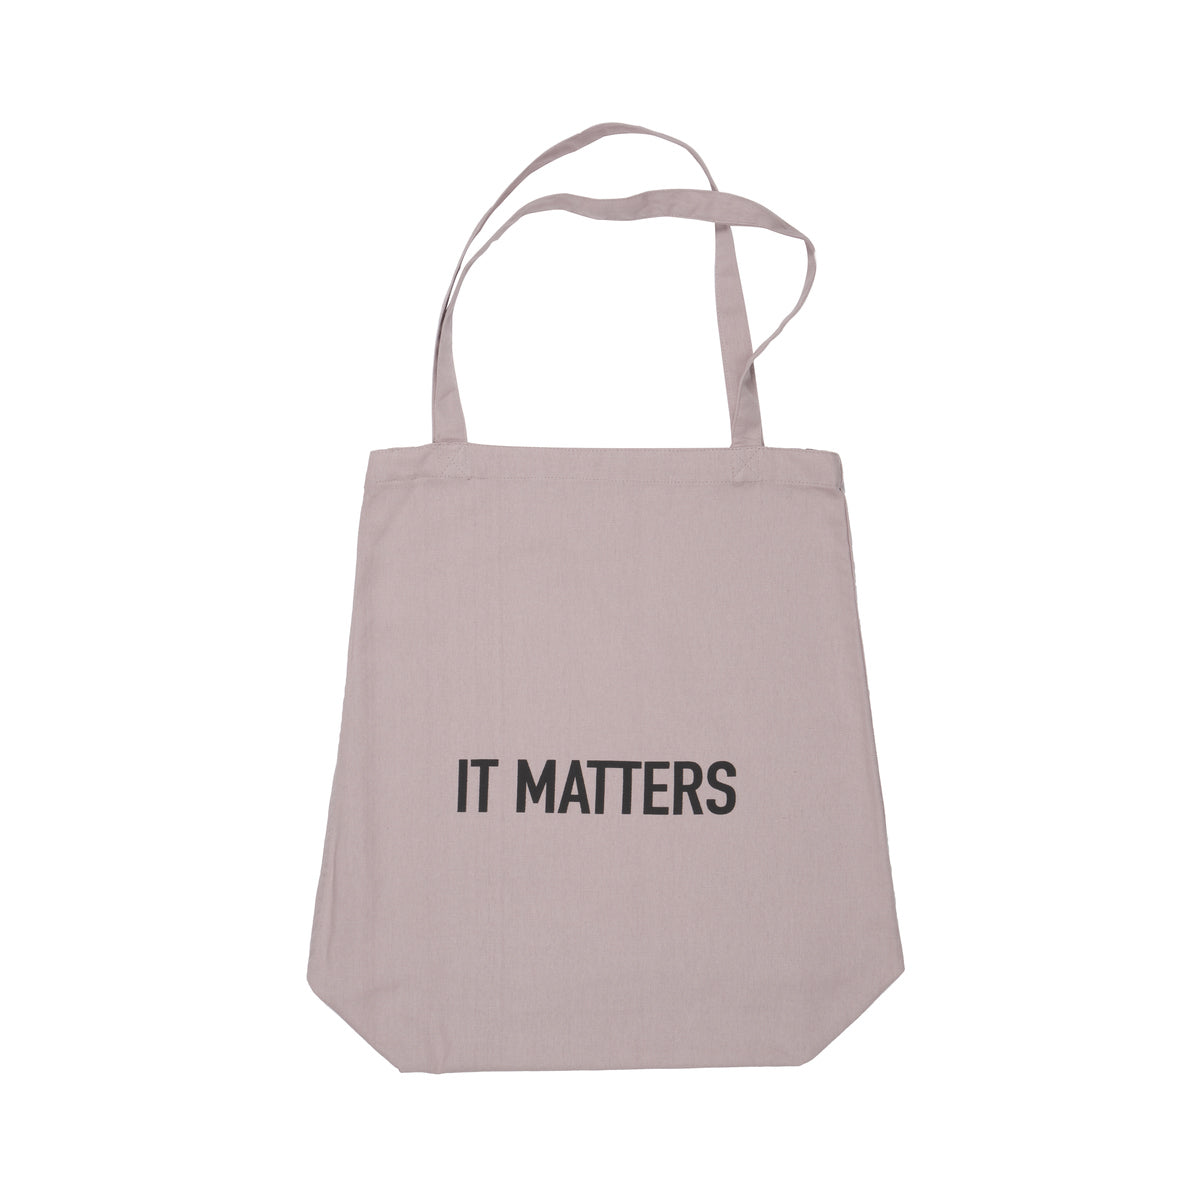 Bag with a message that matters! Dusty lavender light pink  grocery, hobby, office, school and handbag made in organic cotton. Danish. Scandinavian.